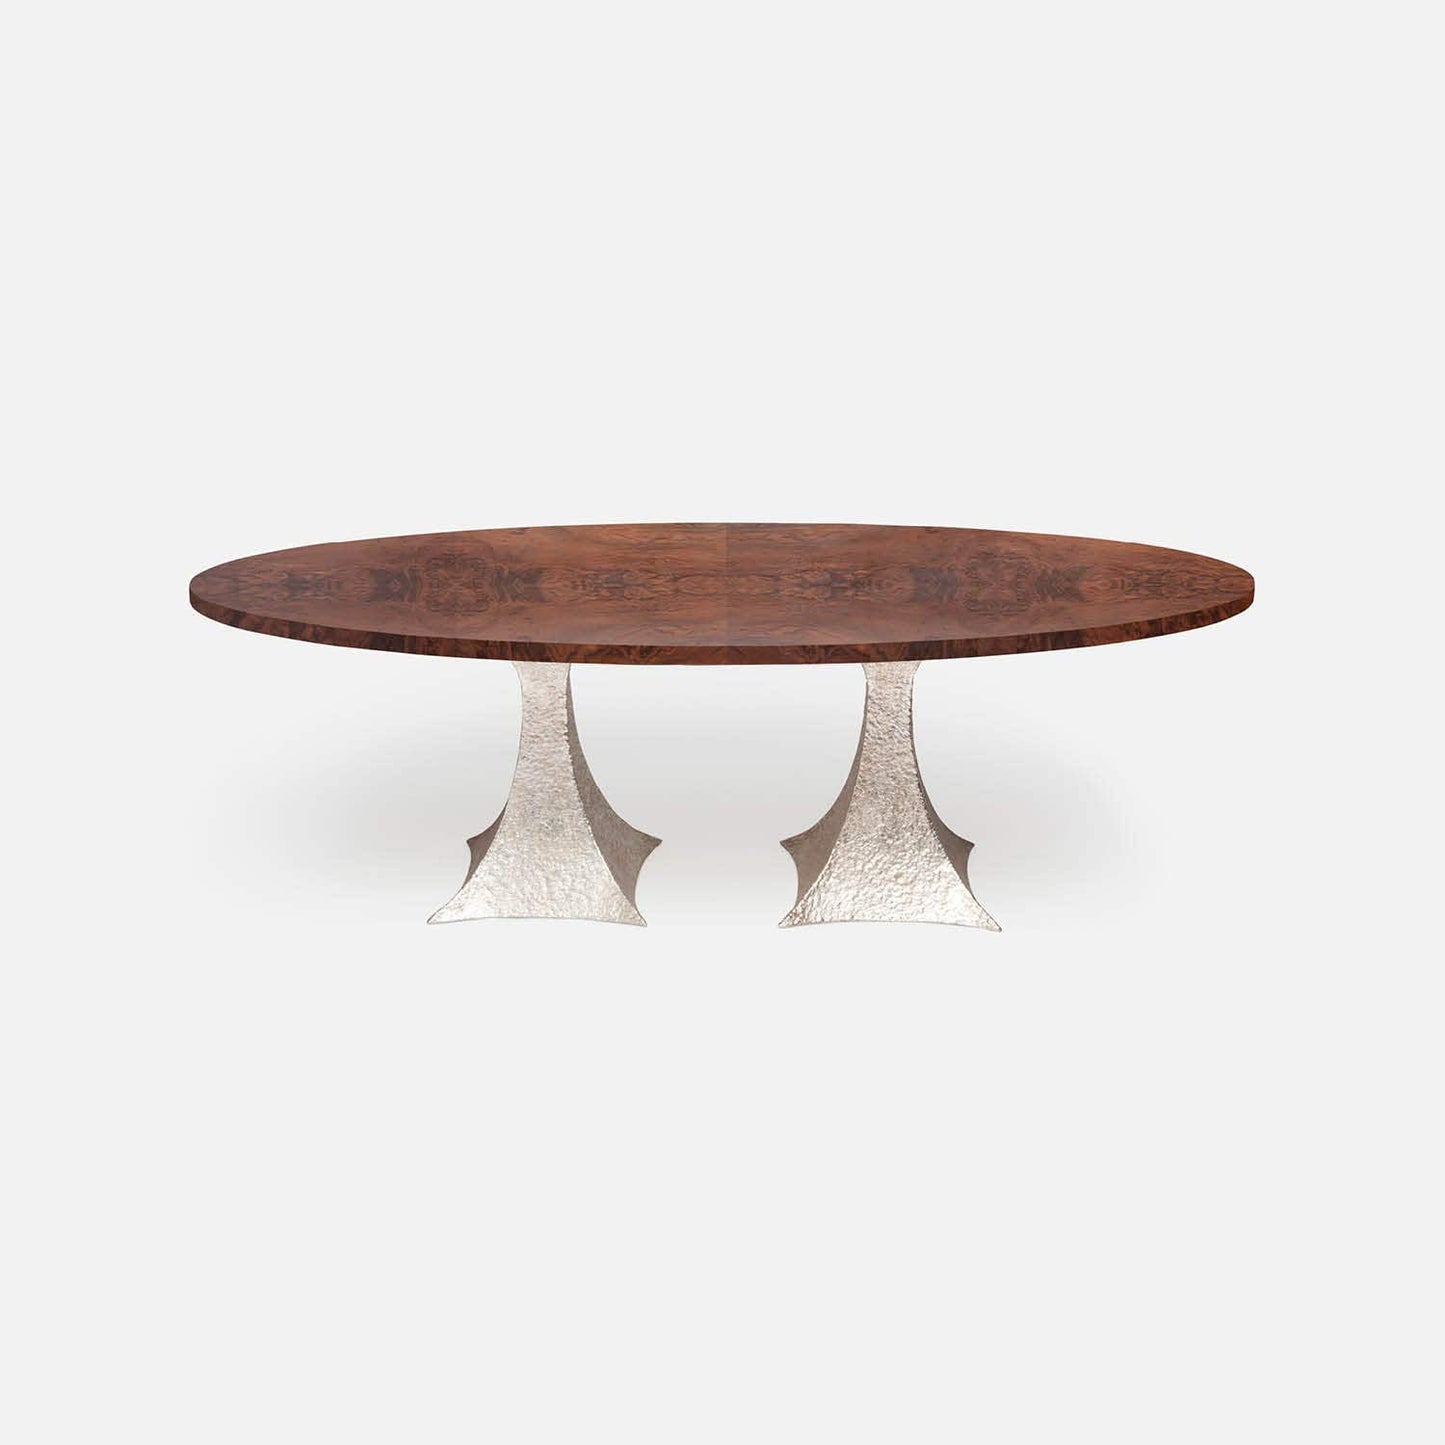 Made Goods Noor 96" x 44" x 30" Double Base Bumpy Cool Silver Iron Dinning Table With Oval Walnut Veneer Table Top